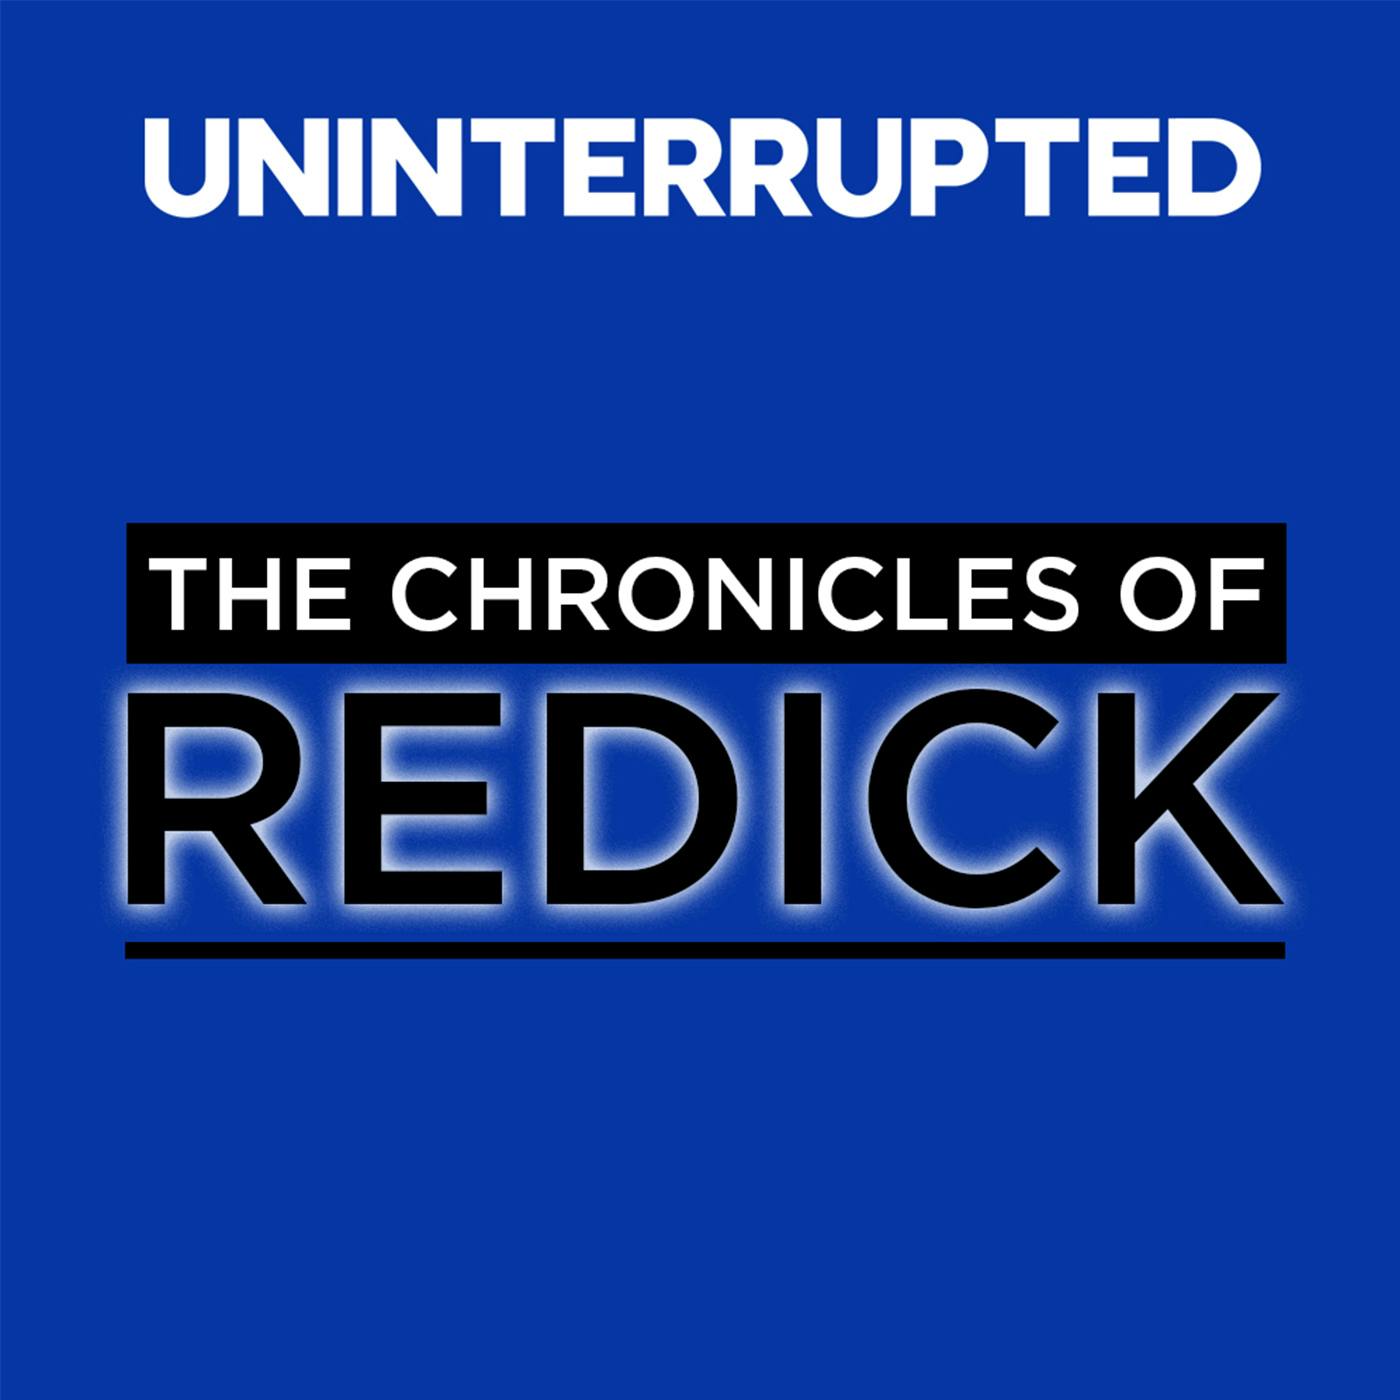 The Chronicles of Redick:UNINTERRUPTED